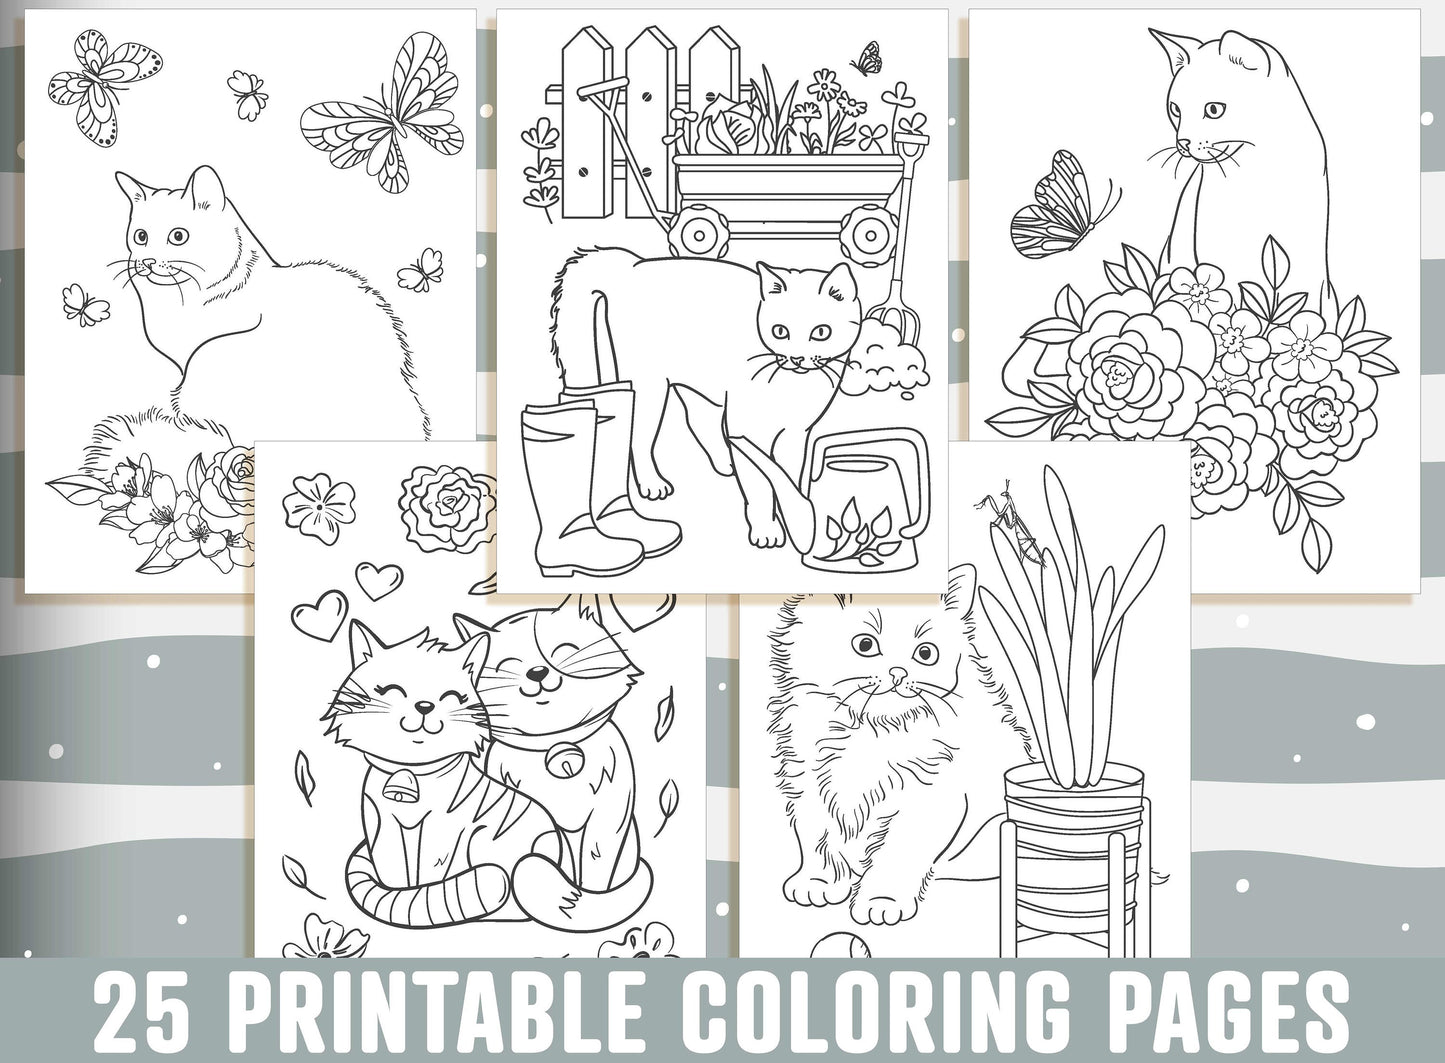 Cat Coloring Pages, 25 Printable Cat Coloring Pages for Kids, Boys, Girls, Teens, Adults. Kitten Birthday Party Activity, Instant Download